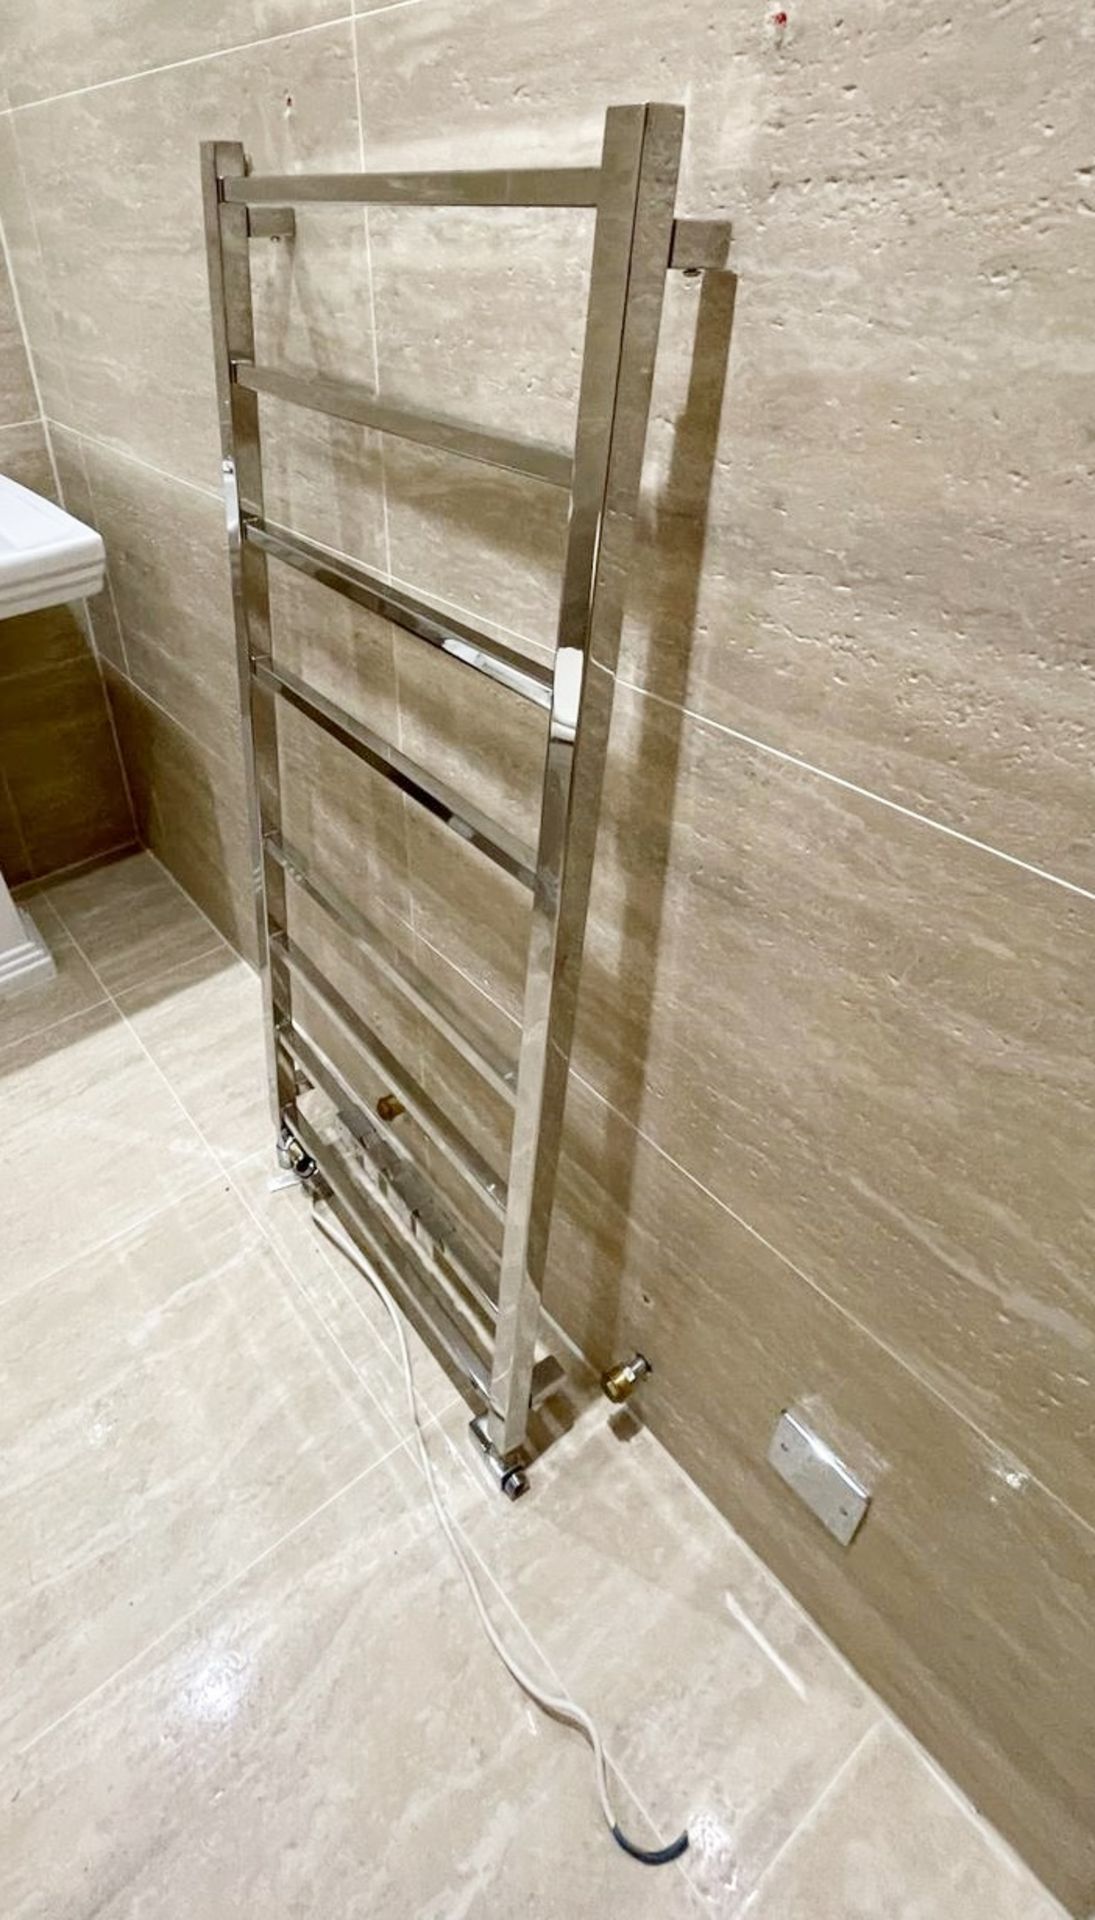 1 x Premium Towel Radiator in Chrome - Ref: FRNT/BD - CL896 - NO VAT ON THE HAMMER - Location: - Image 2 of 3